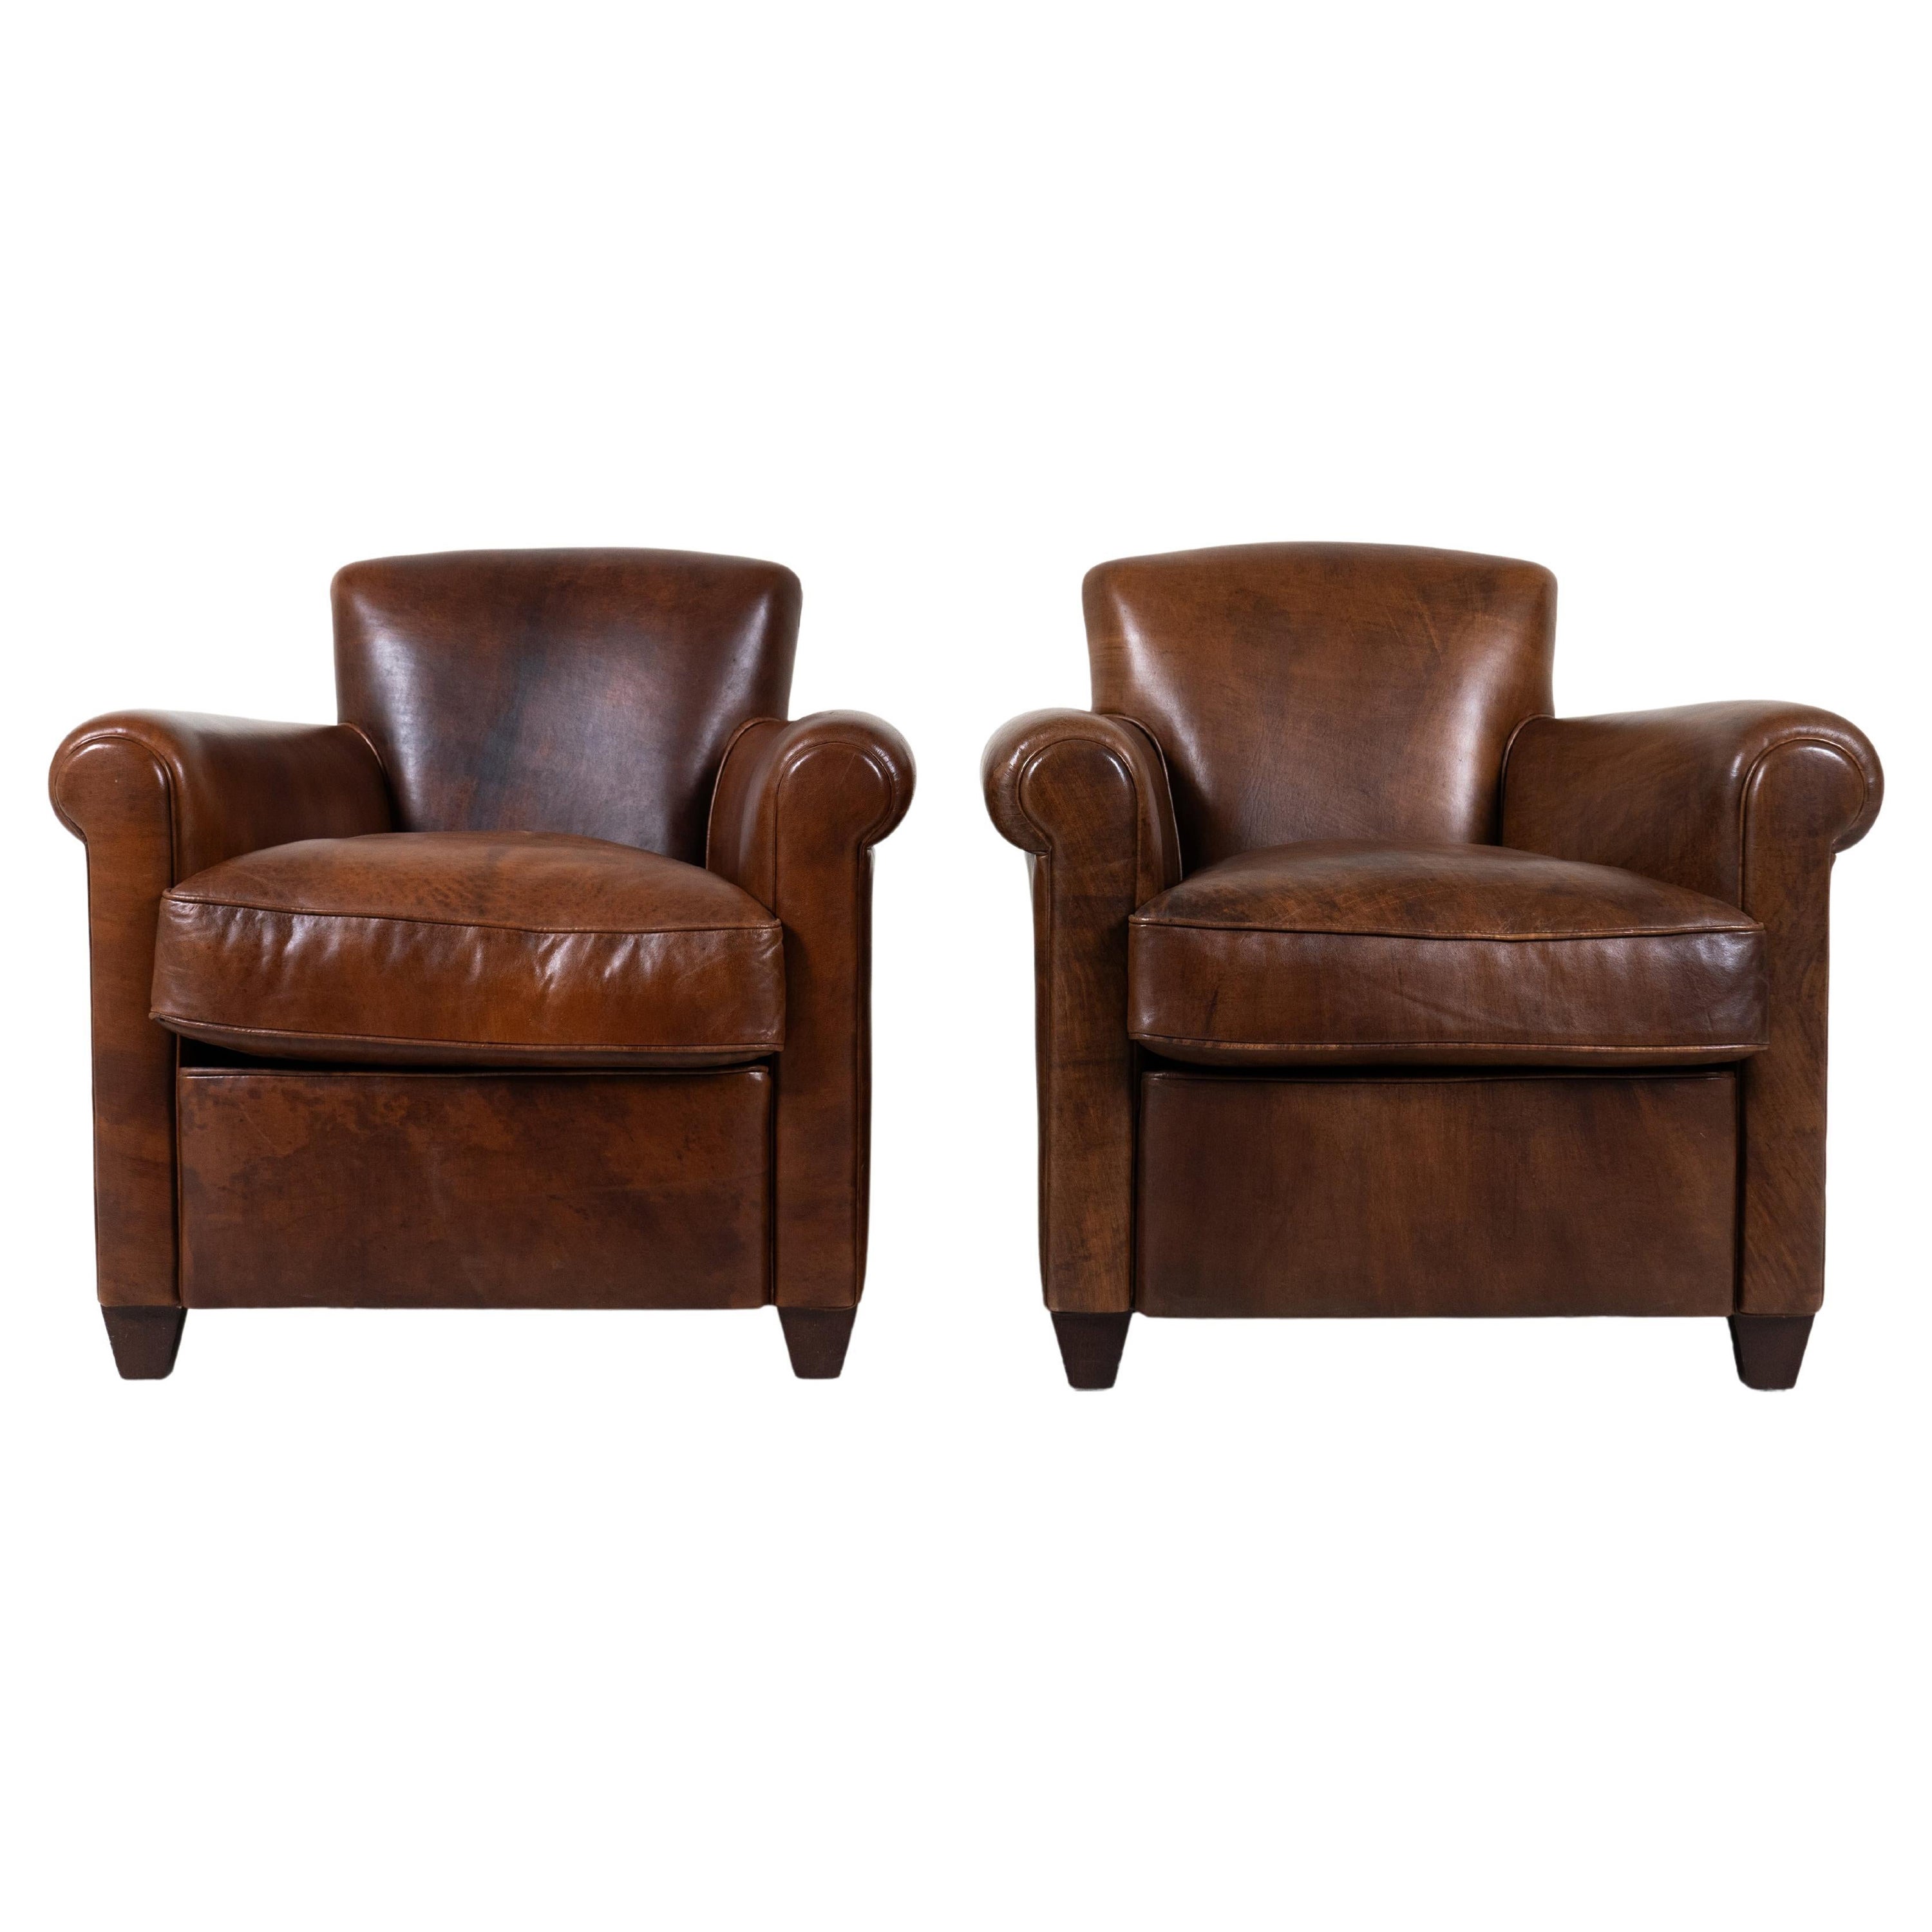 A Pair of Lamb Leather Chairs, France Newly Made For Sale